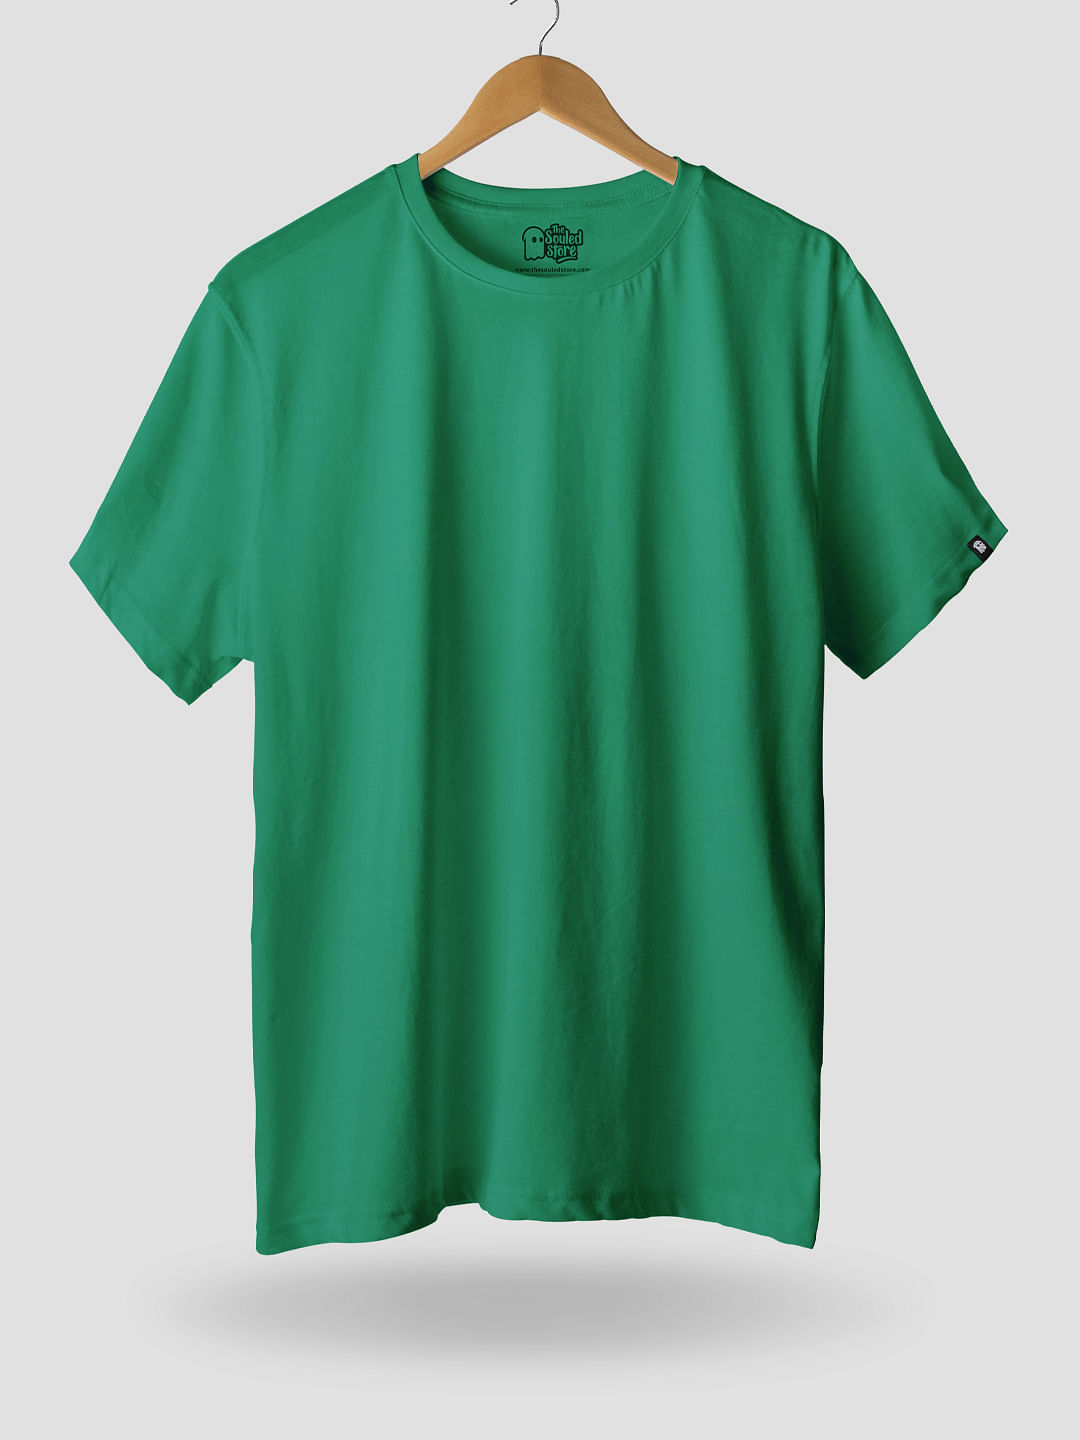 Buy Solids: Leafy Green Half Sleeve T-Shirts online at The Souled Store.